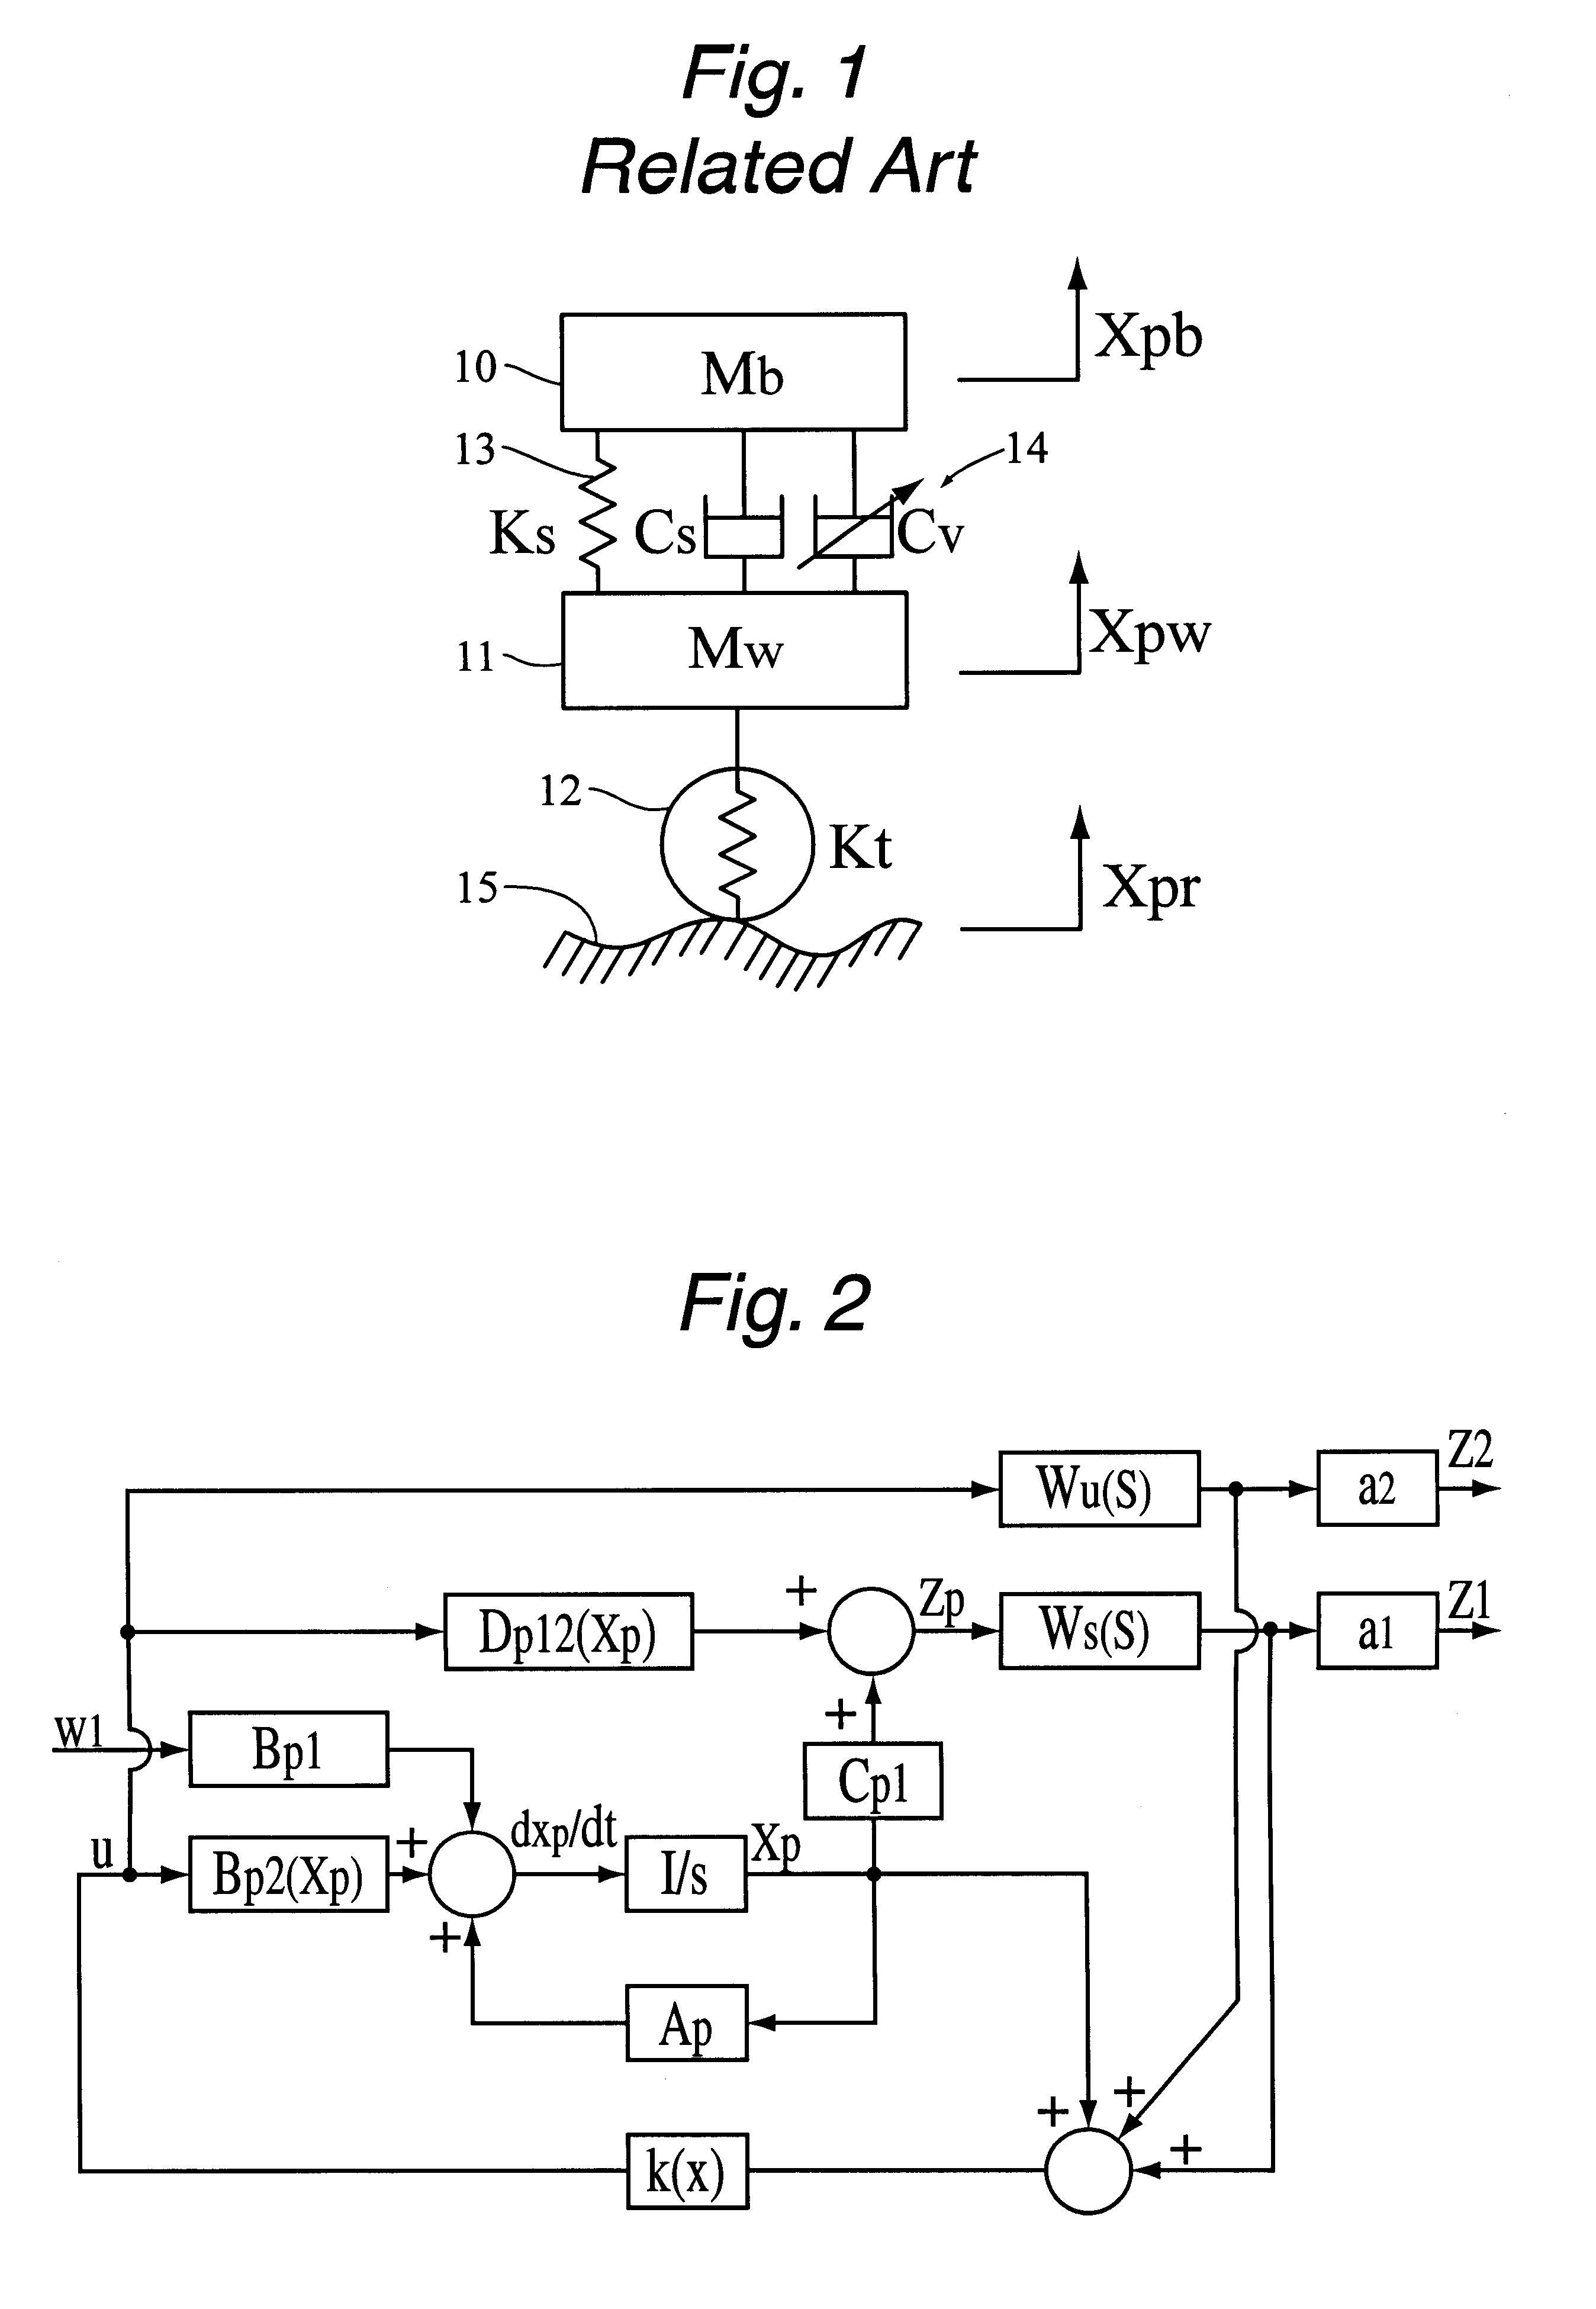 Control system for resilient support mechanism such as vehicle suspension mechanism